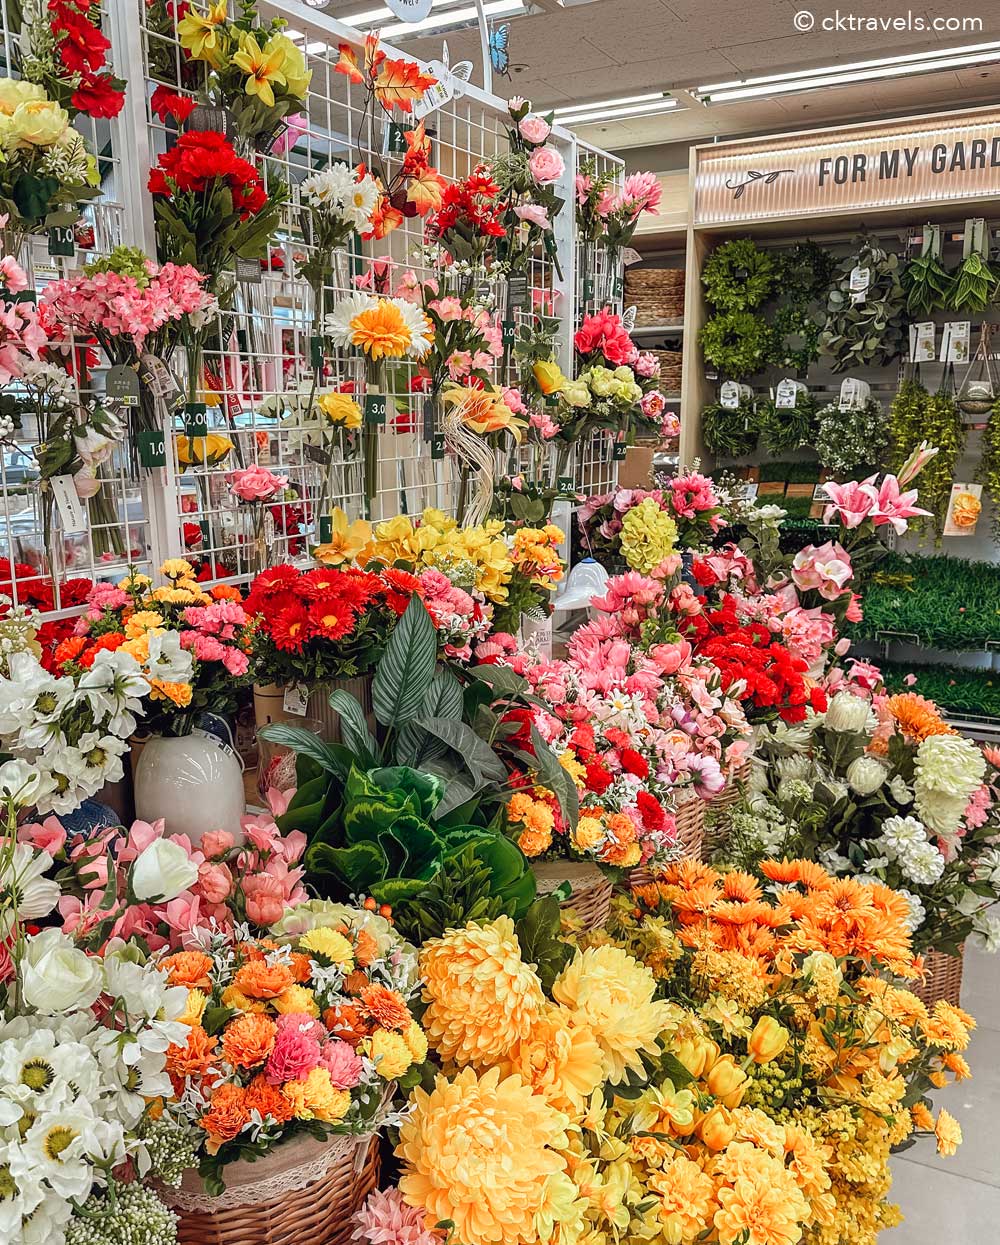 12 floor Daiso in Myeongdong Seoul - Gardening and flowers